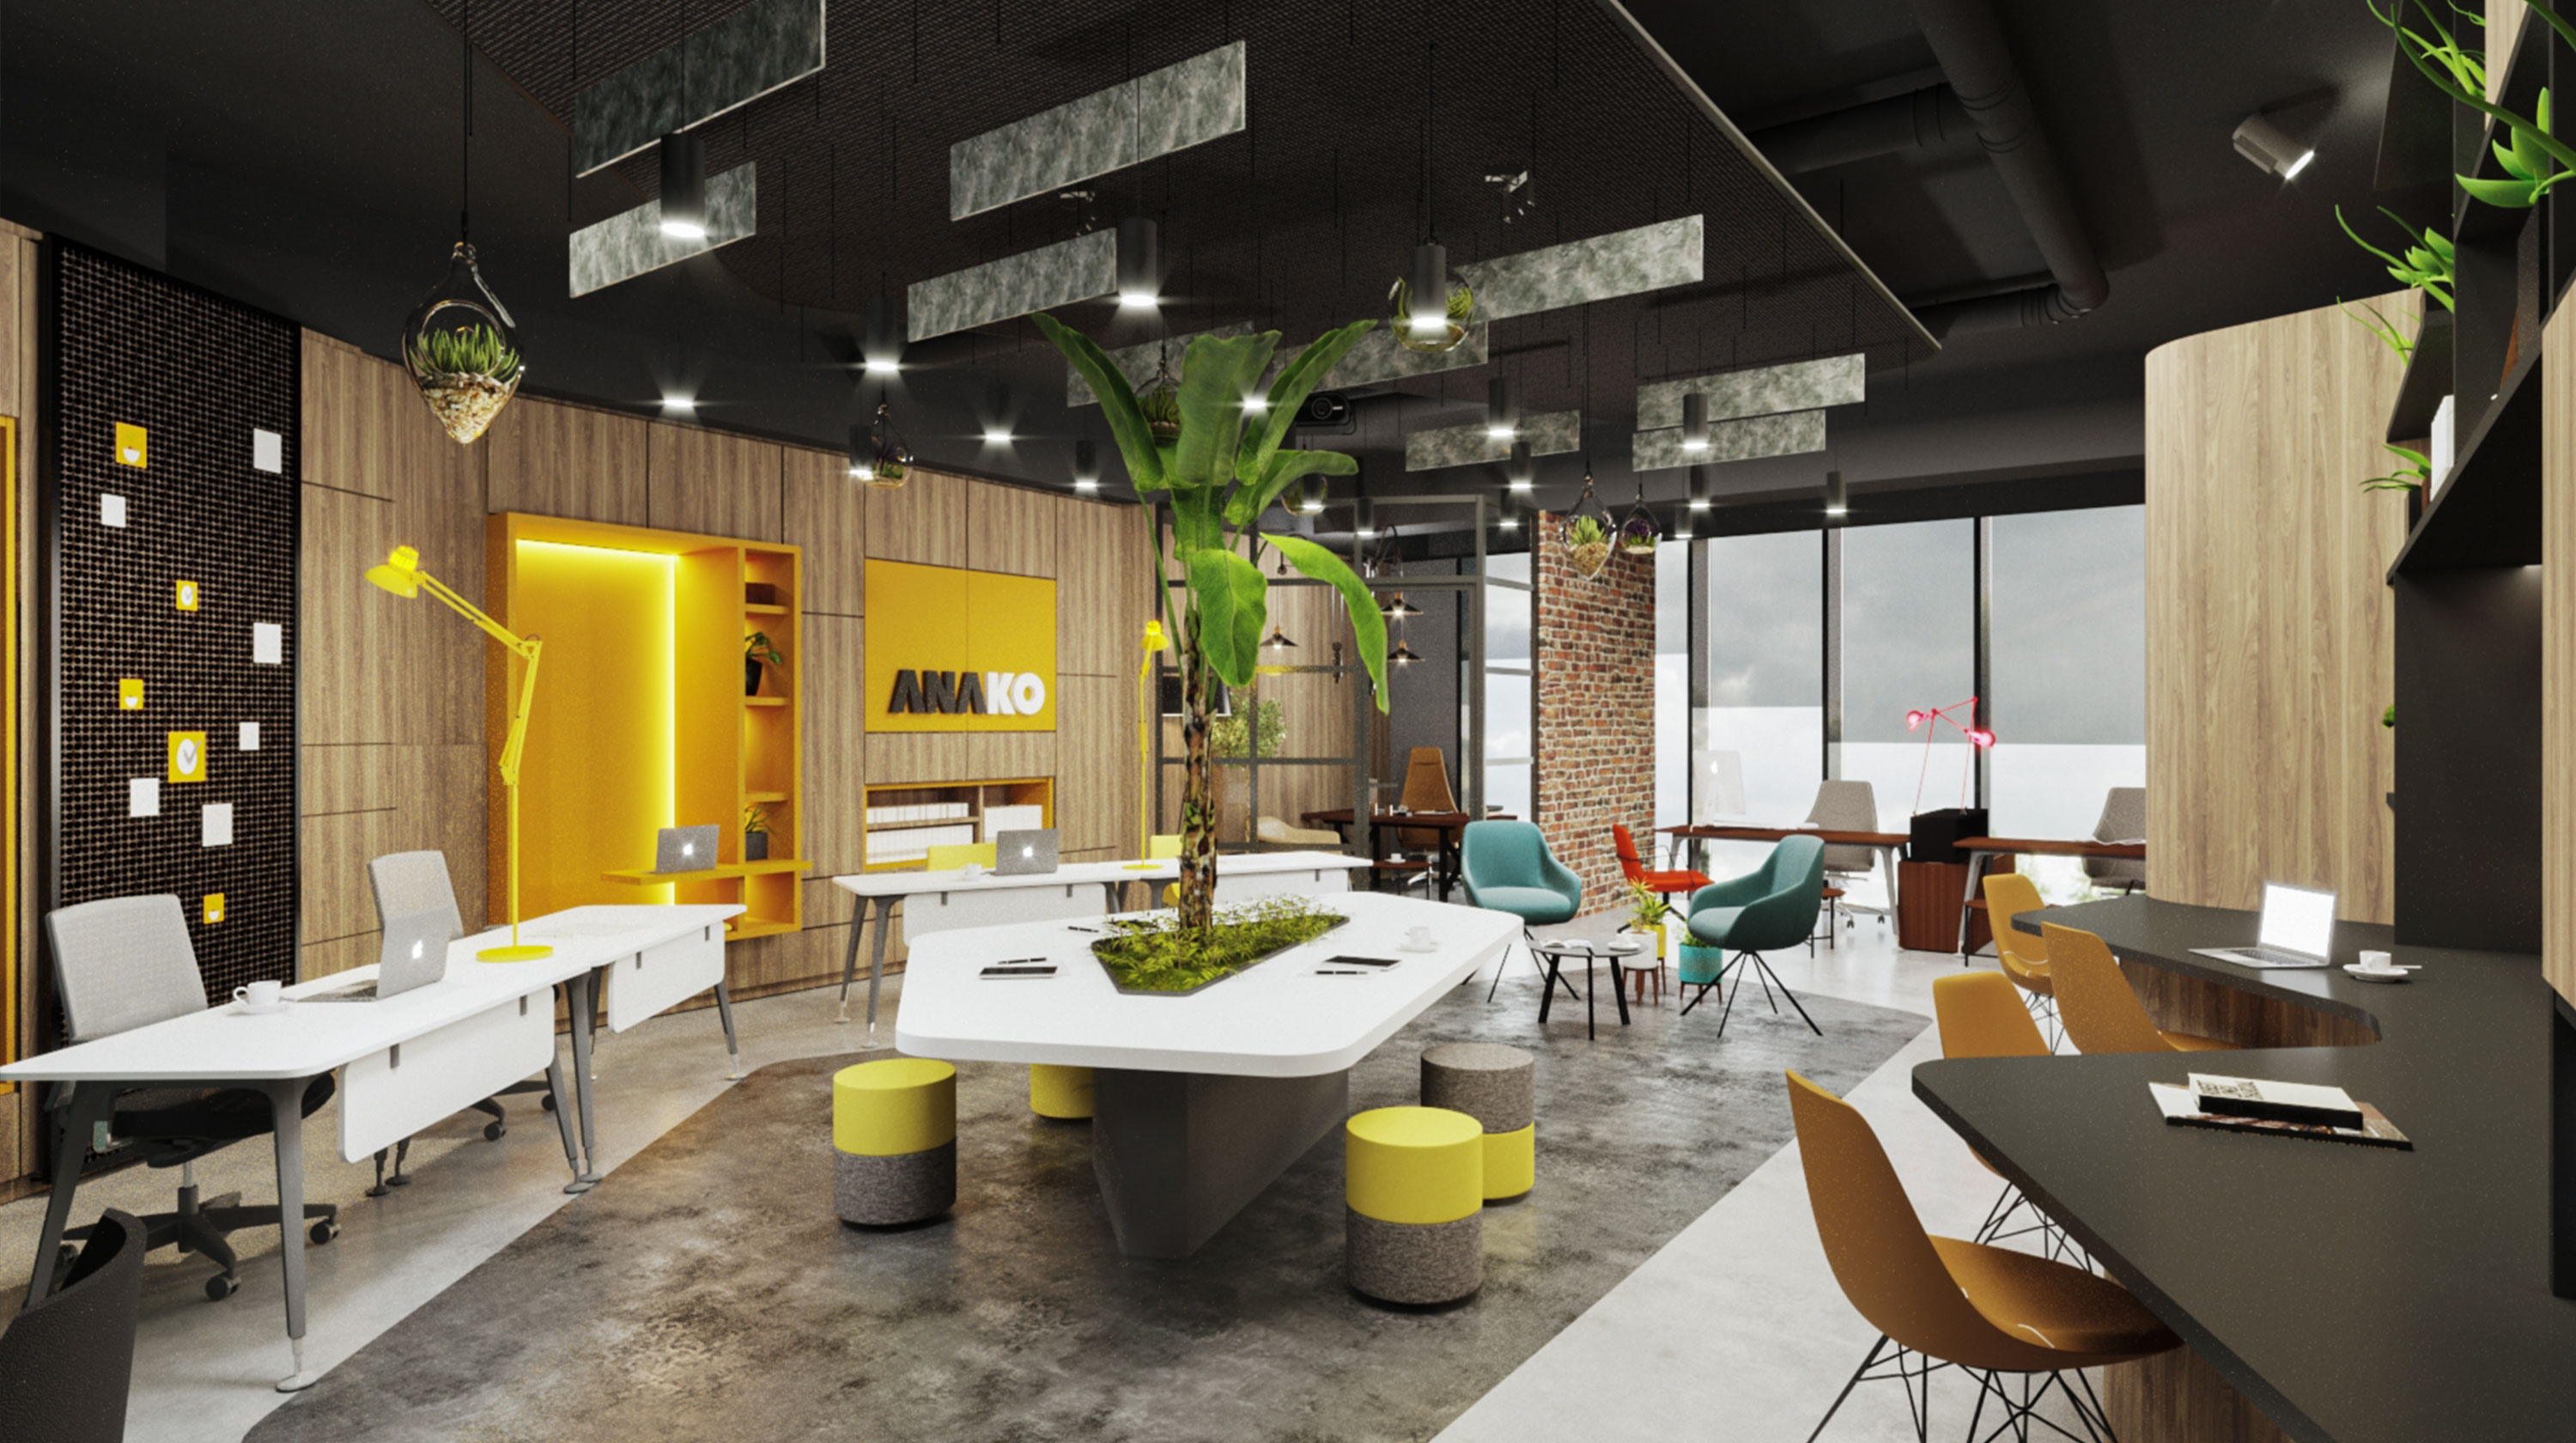 Istanbul Anako Office Interior Design Project